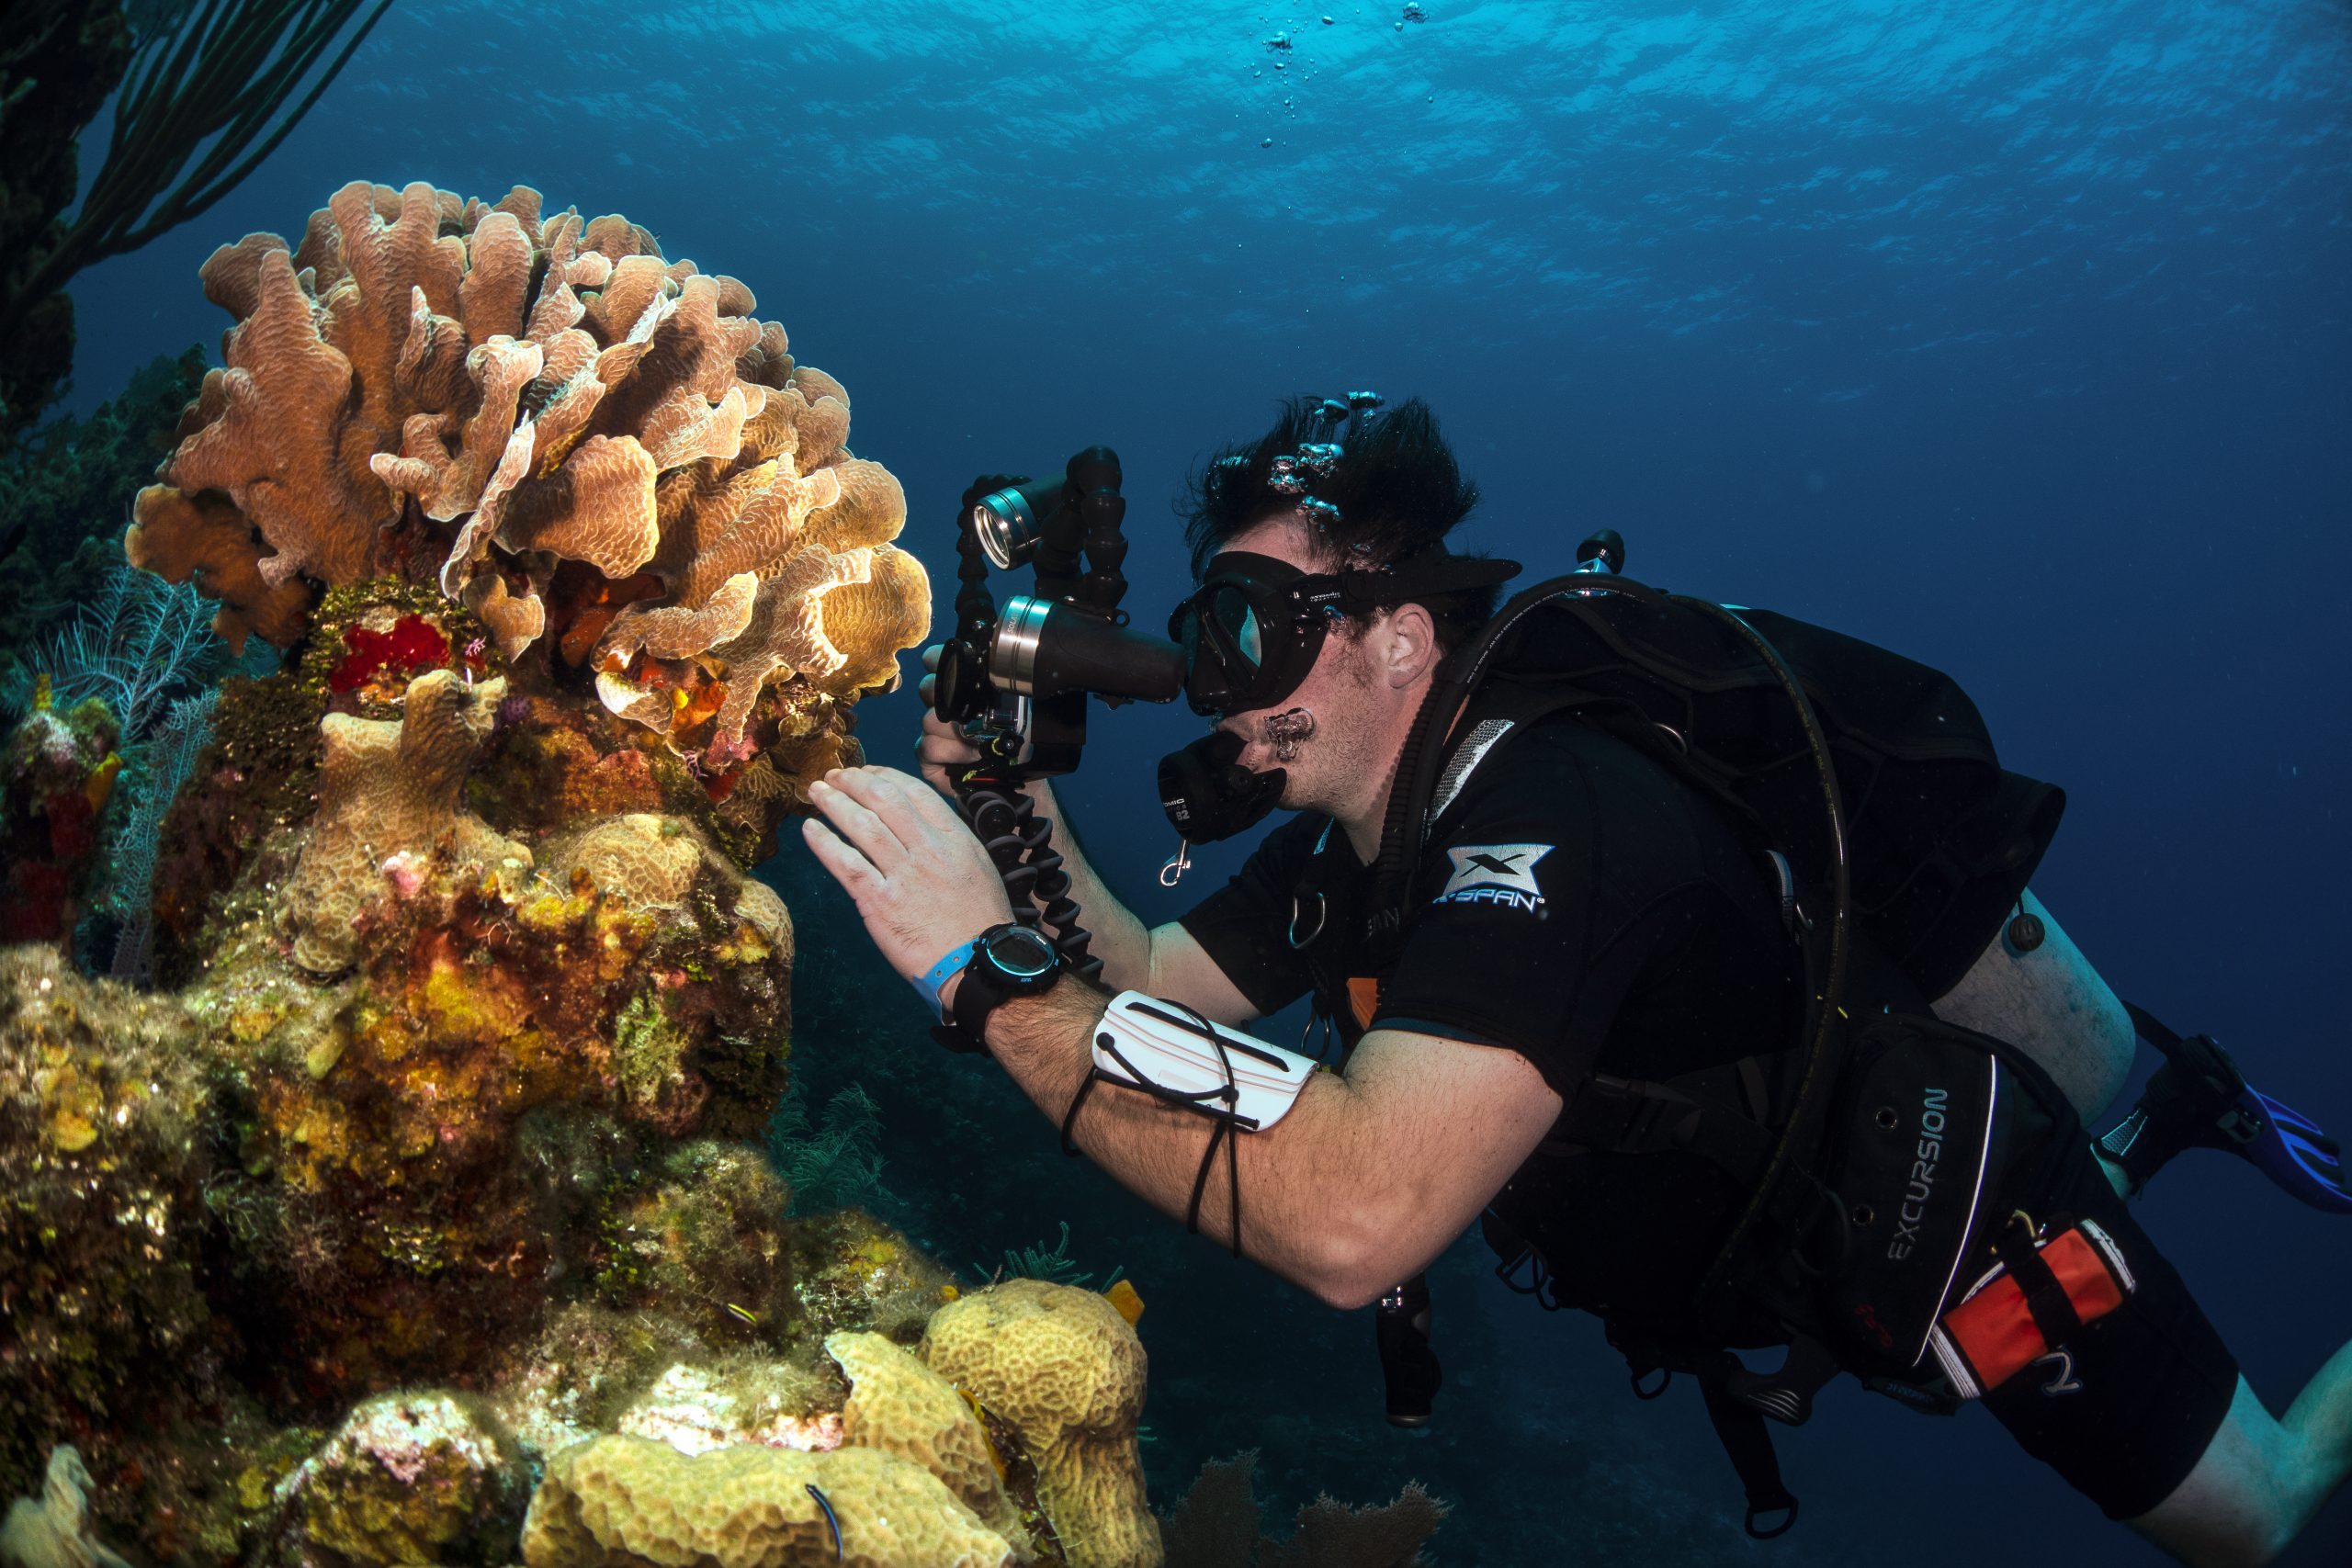 The author’s son, Joseph Walker, films coral on a dive in Roatán, Honduras, using the latest technology and equipment in underwater exploration.